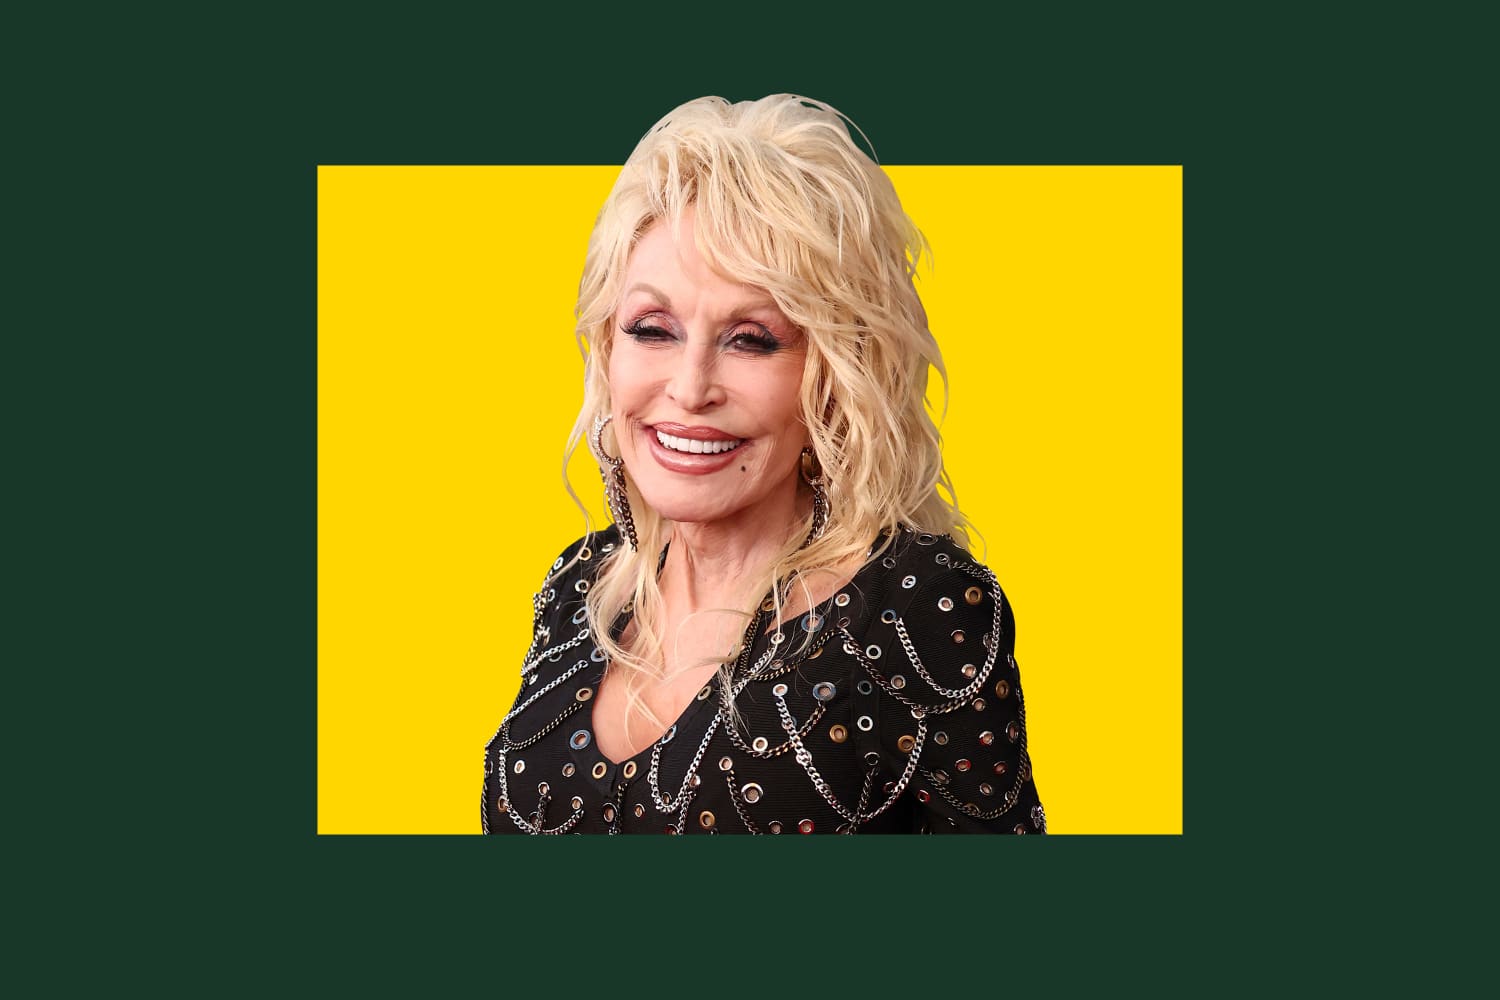 Dolly Parton’s Gorgeous Kitchen Cabinets Are Not the Color You’d Expect